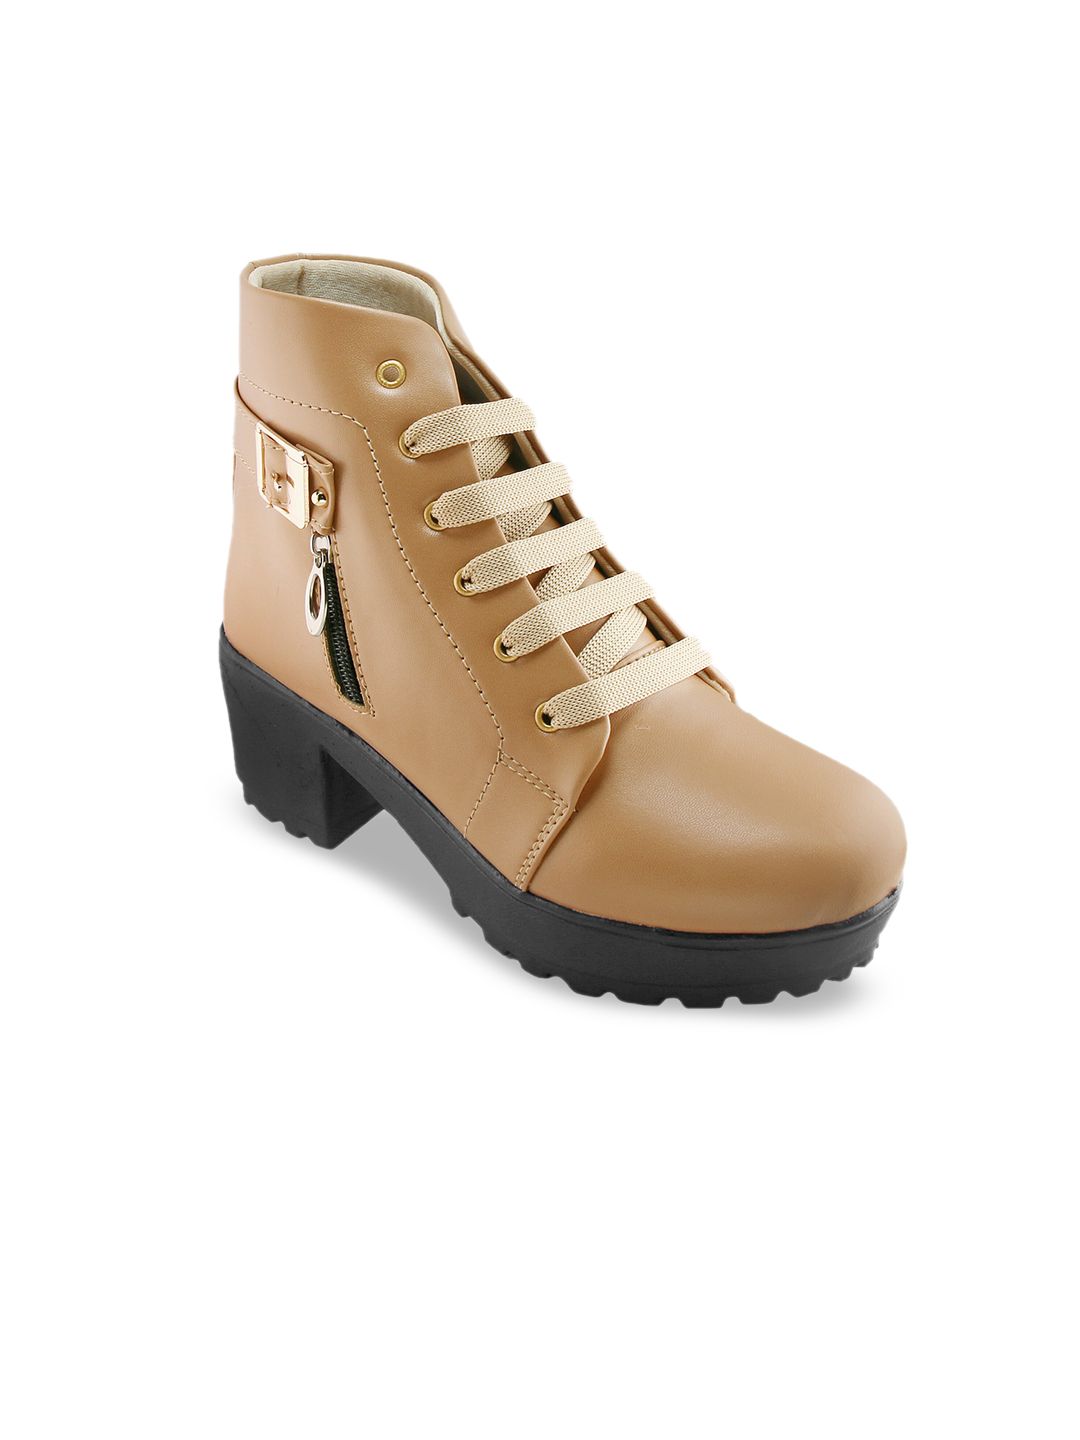 BOOTCO Women Beige & Black Solid Heeled Boots Price in India